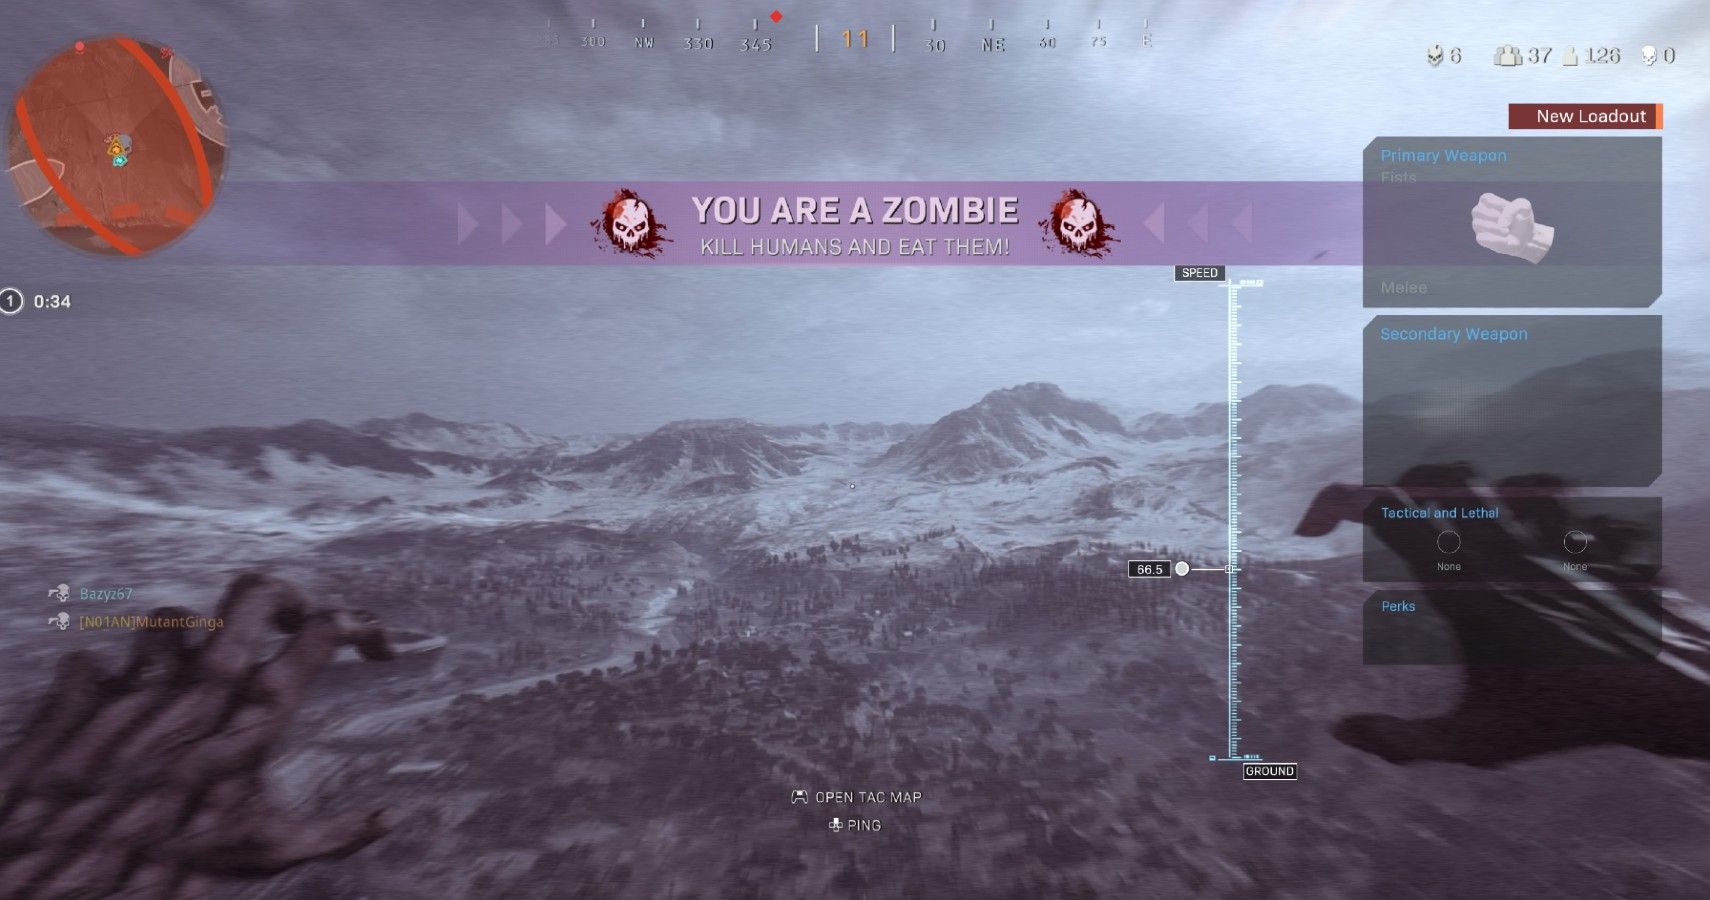 Warzone Modes that have zombie players